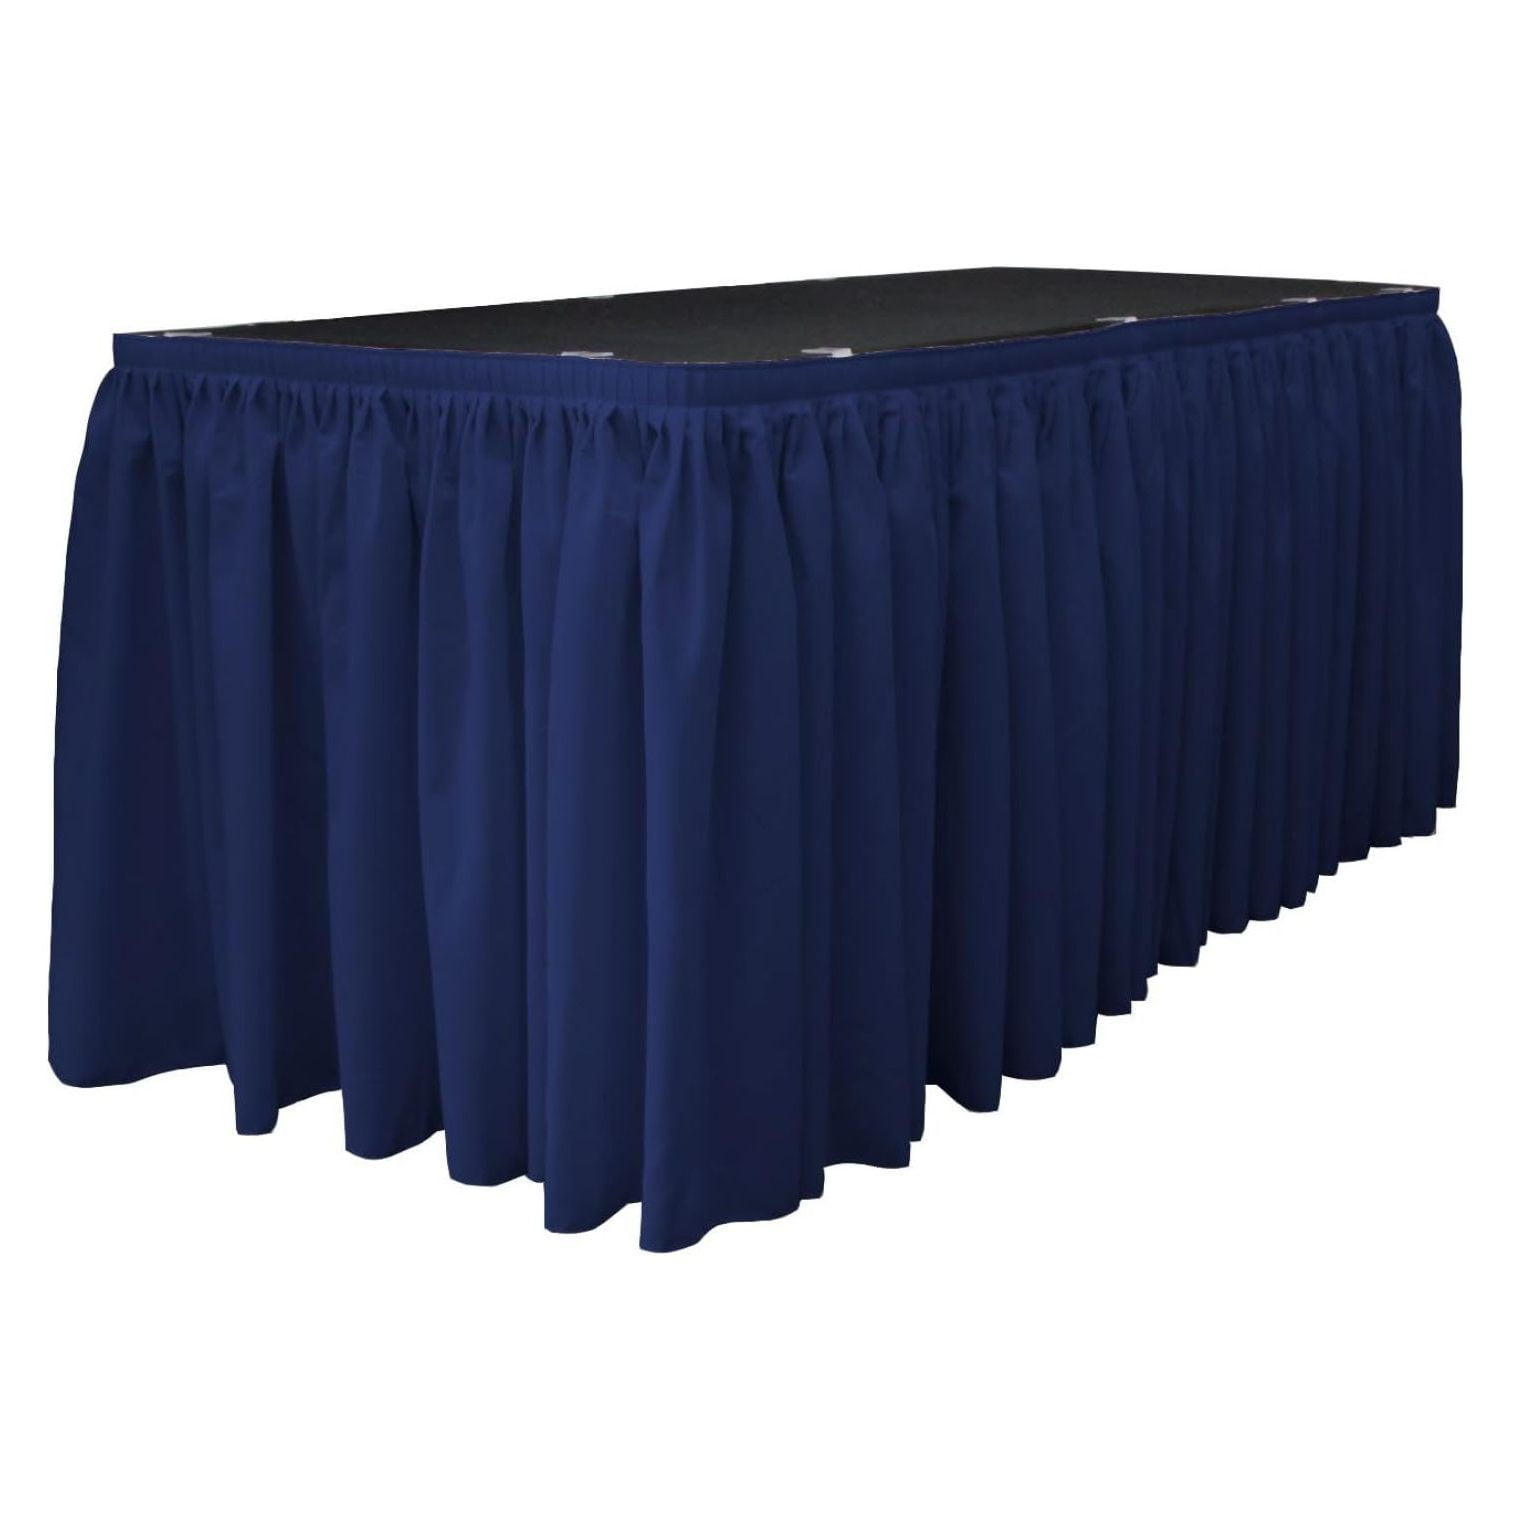 NIKOZQ Polyester Poplin Table Skirt for Rectangle Tables, Pleat Fabric ...